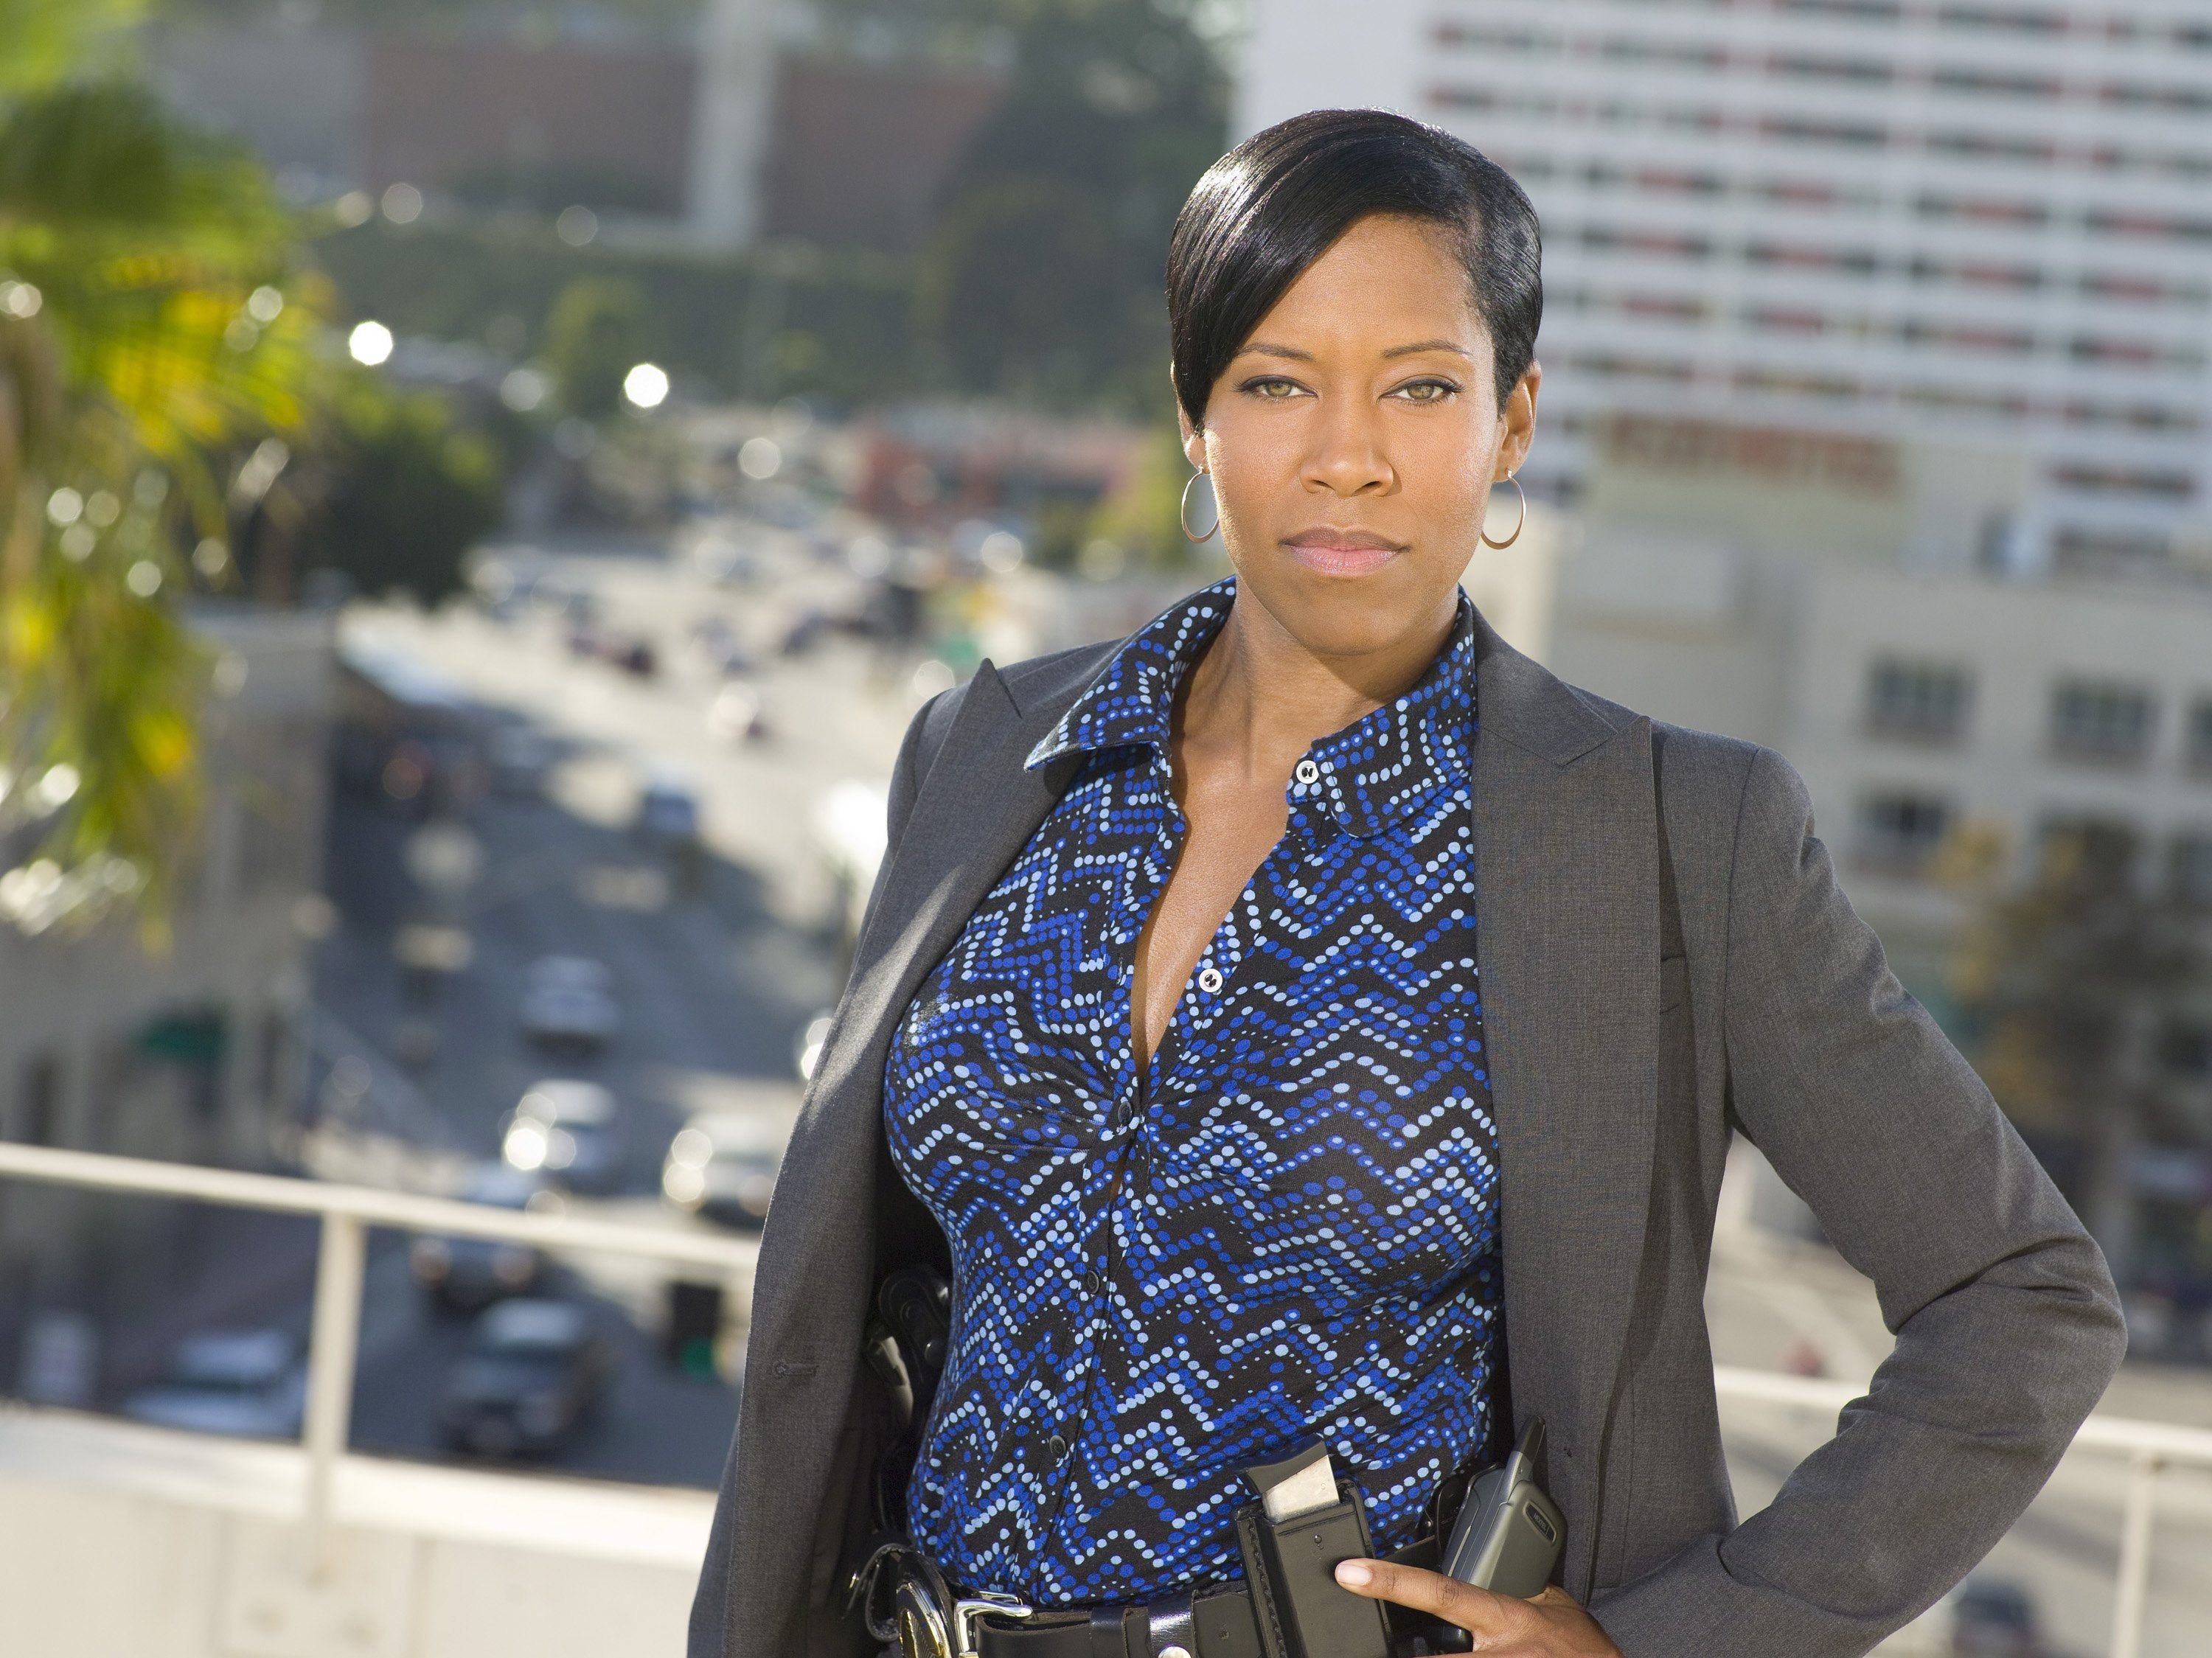 Regina King  poses for a photo for "Southland" Season 1. | Source: Getty Images